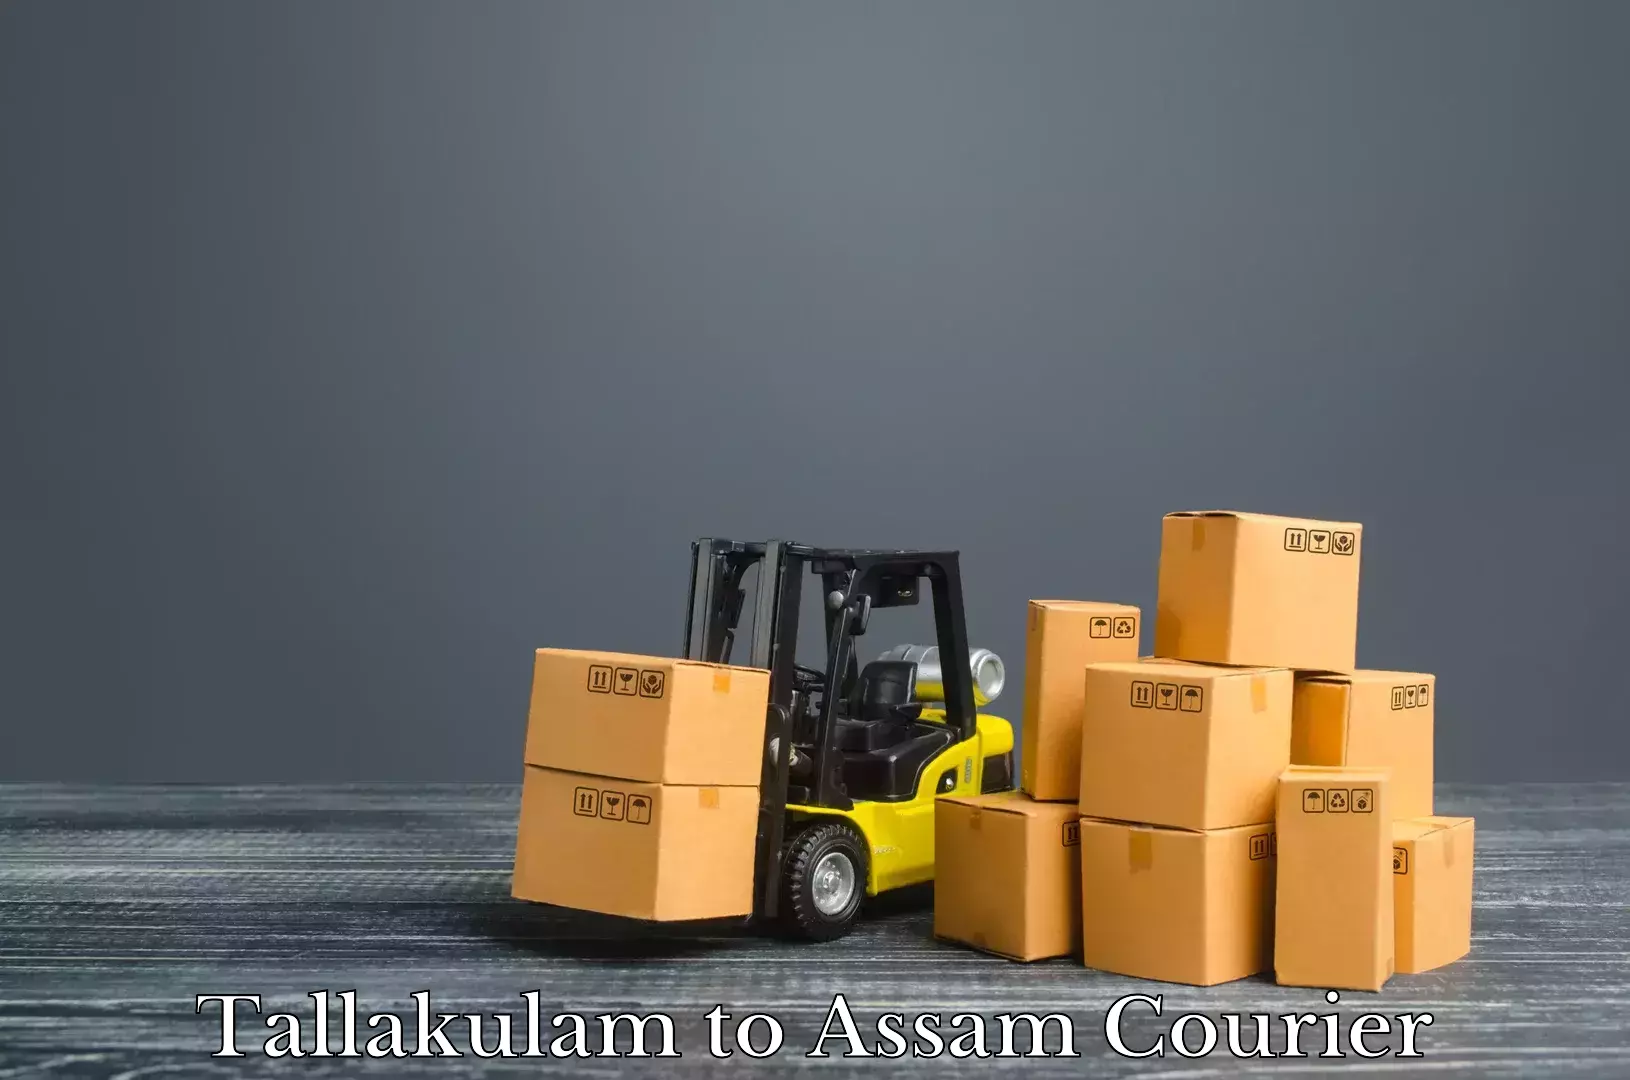 Heavy luggage shipping in Tallakulam to Lala Assam